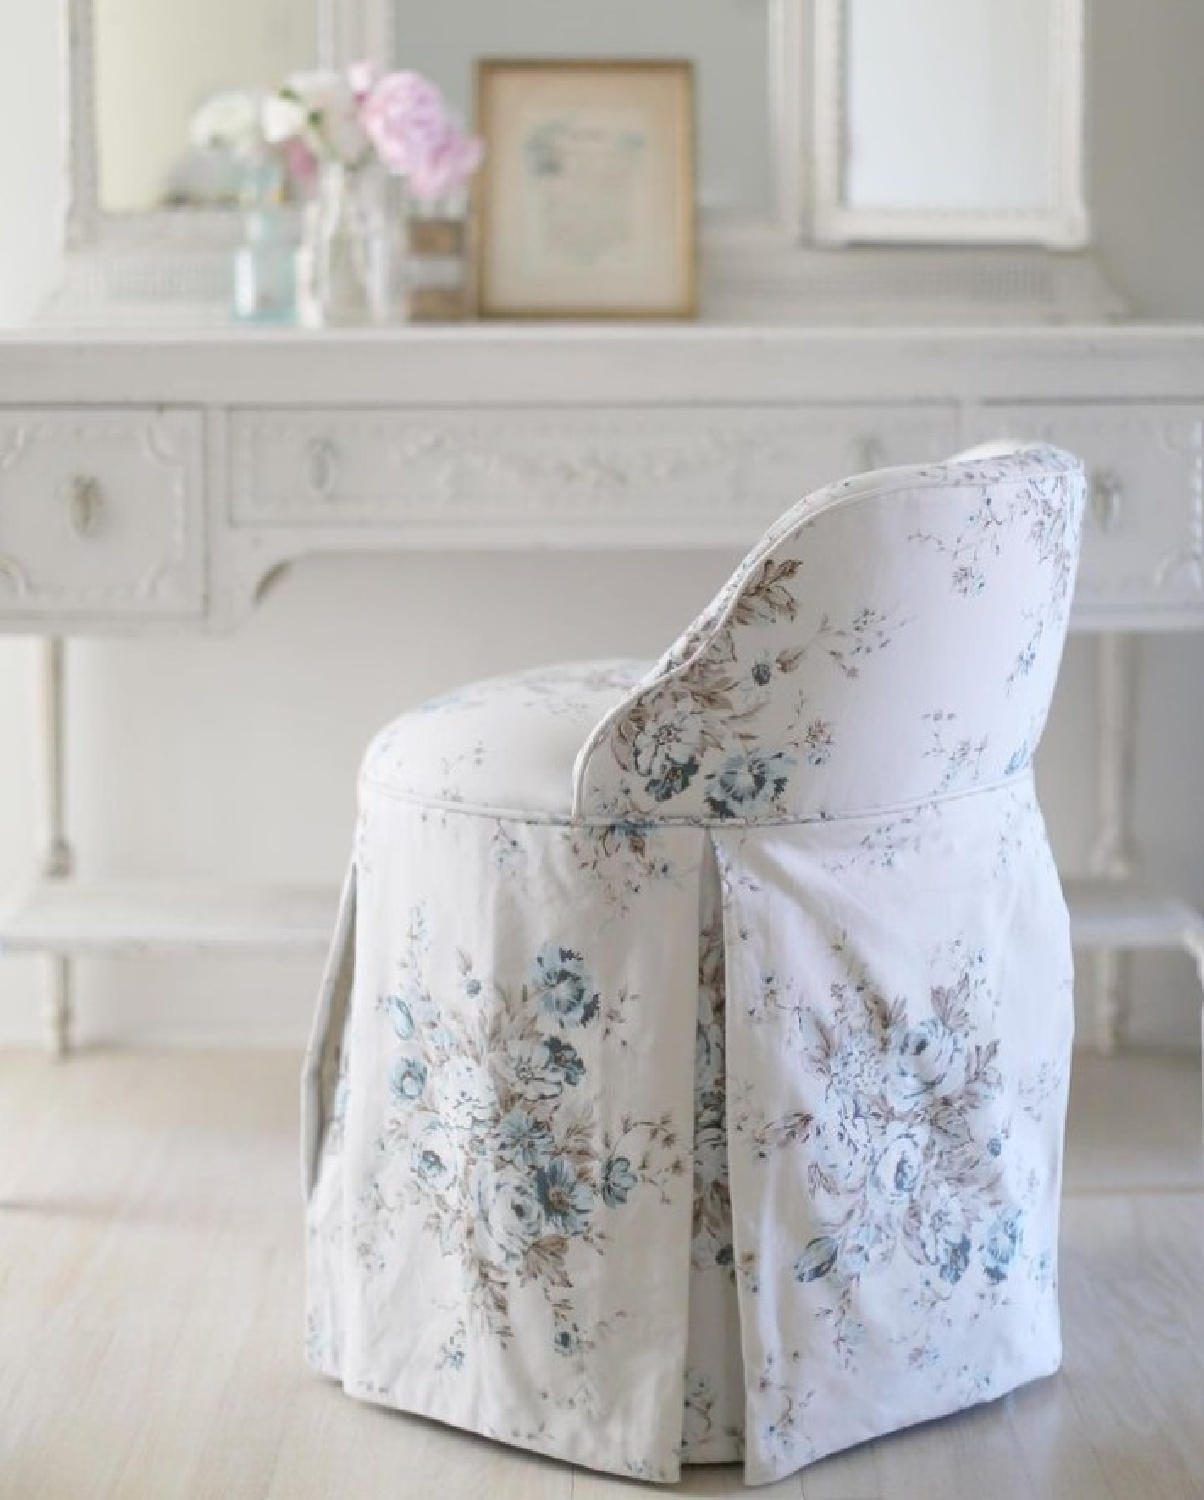 Pipi vanity chair in aqua floral at a vintage vanity - Rachel Ashwell Shabby Chic. #vanitychairs #shabbychicdecor #romanticflorals #dressingrooms